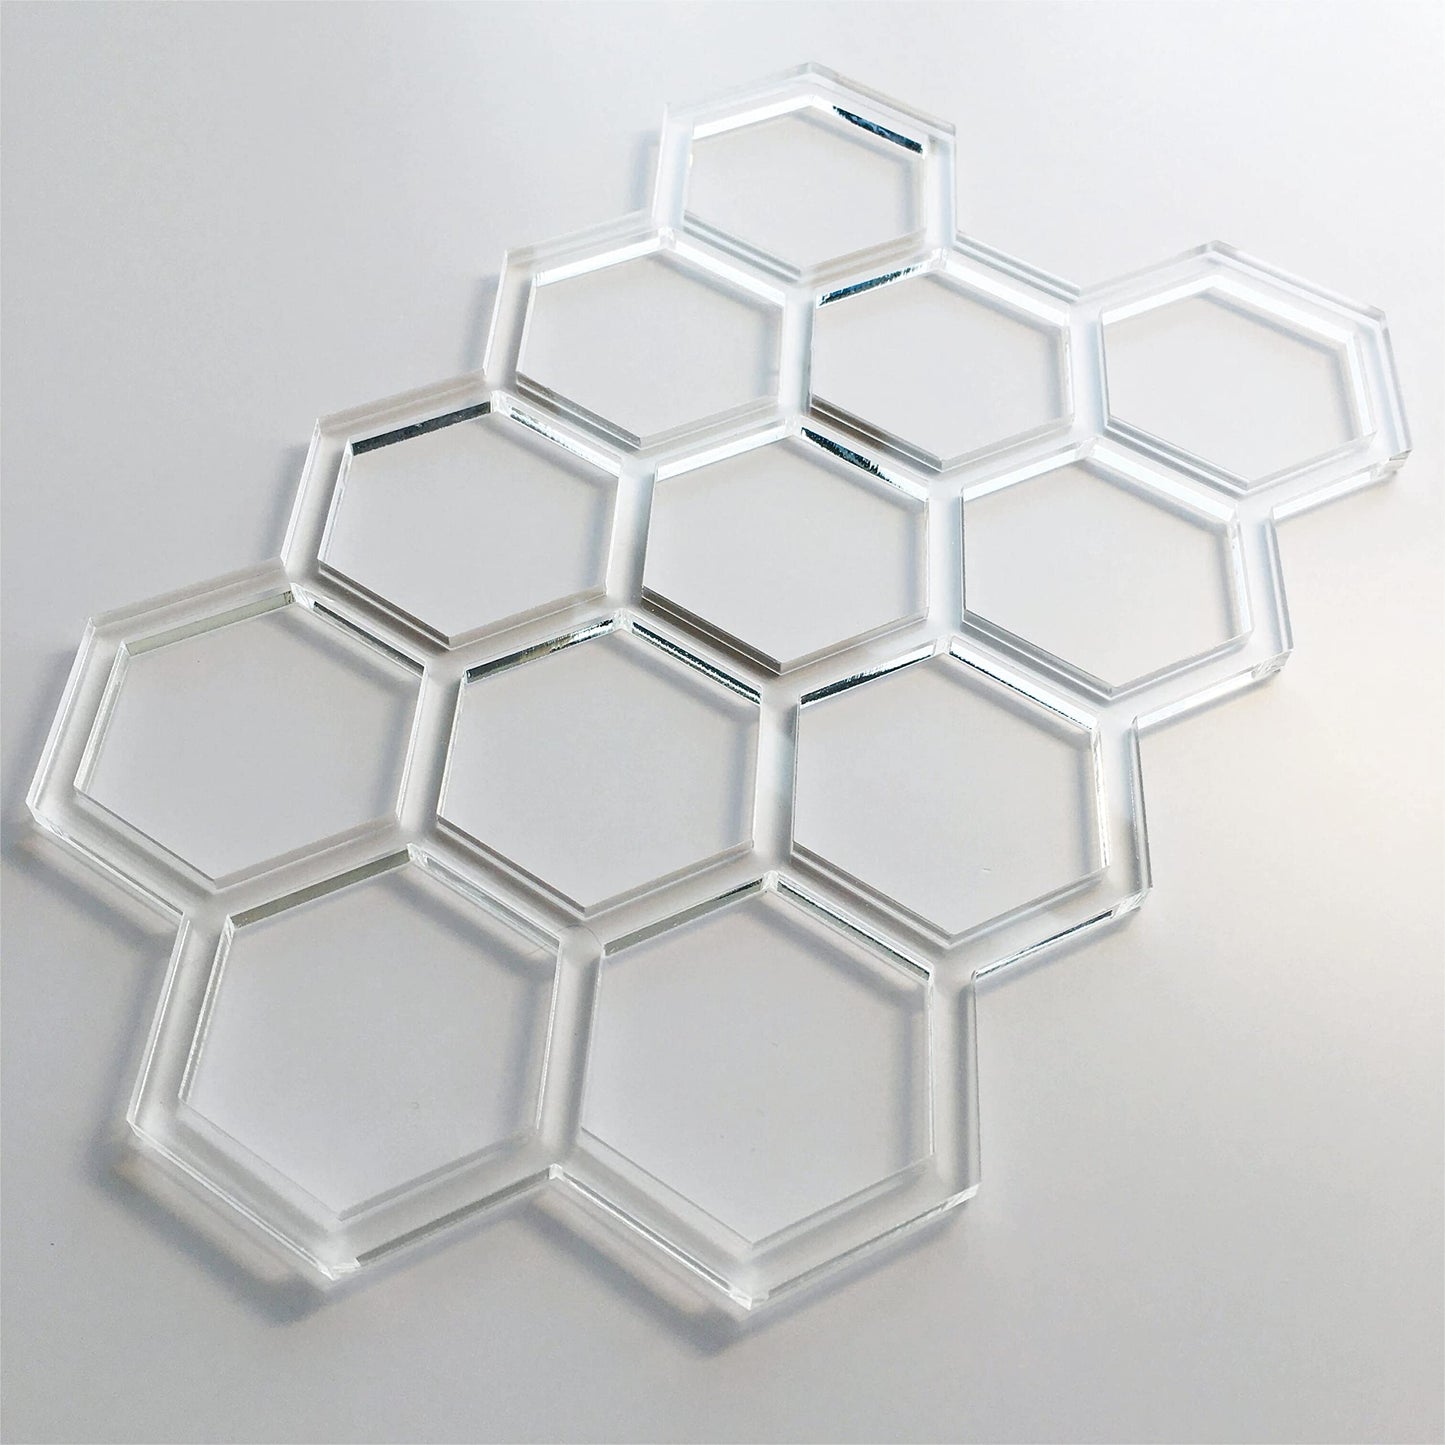 Honeycomb Template, Clear Acrylic Template, Woodworking Router Template for Making Charcuterie Boards